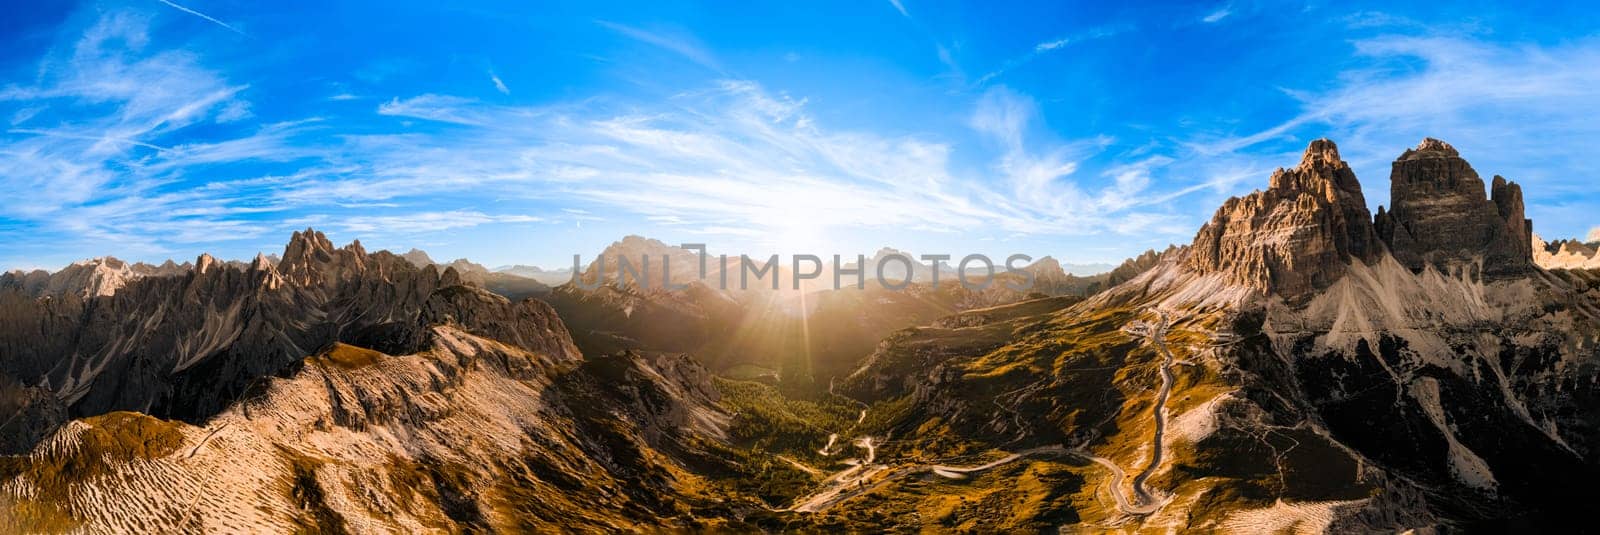 Curved road on rocky highland under blue sky with white clouds. Bare mountain landscape of Three Peaks of Lavaredo at sunset aerial view